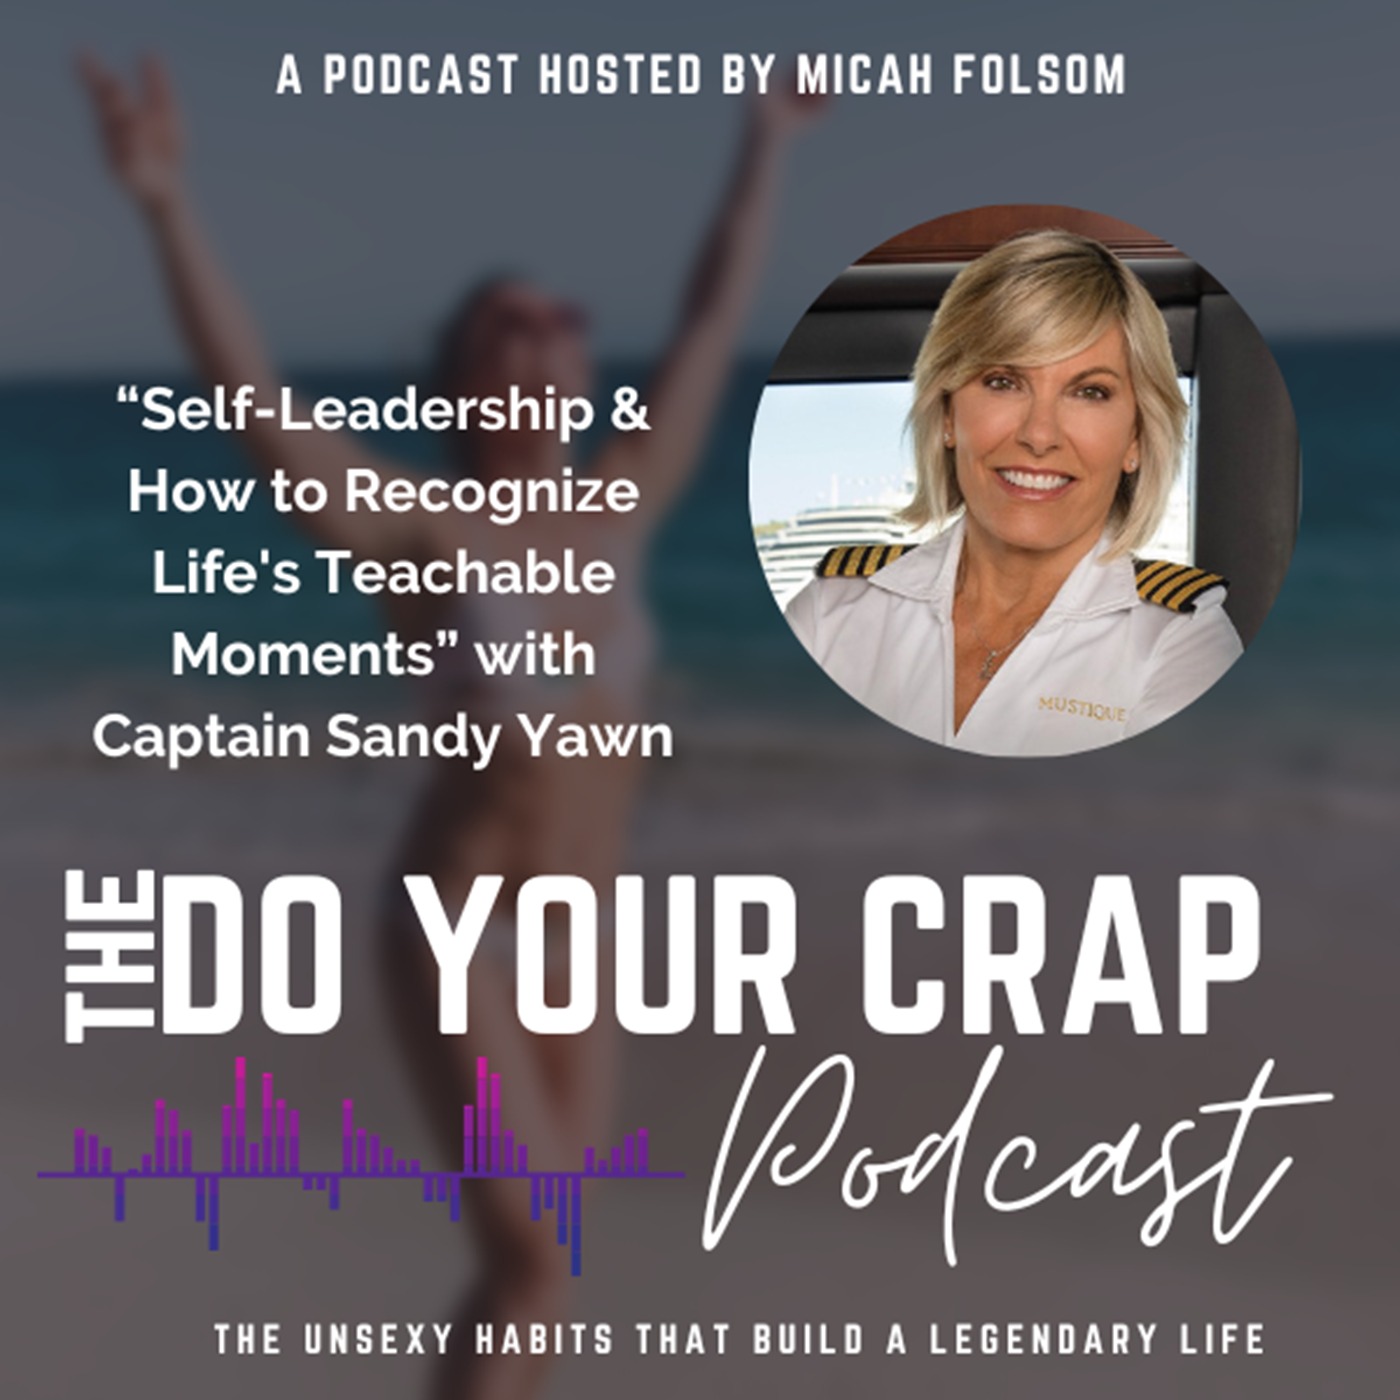 Self-Leadership & How to Recognize Life's Teachable Moments with Captain Sandy Yawn